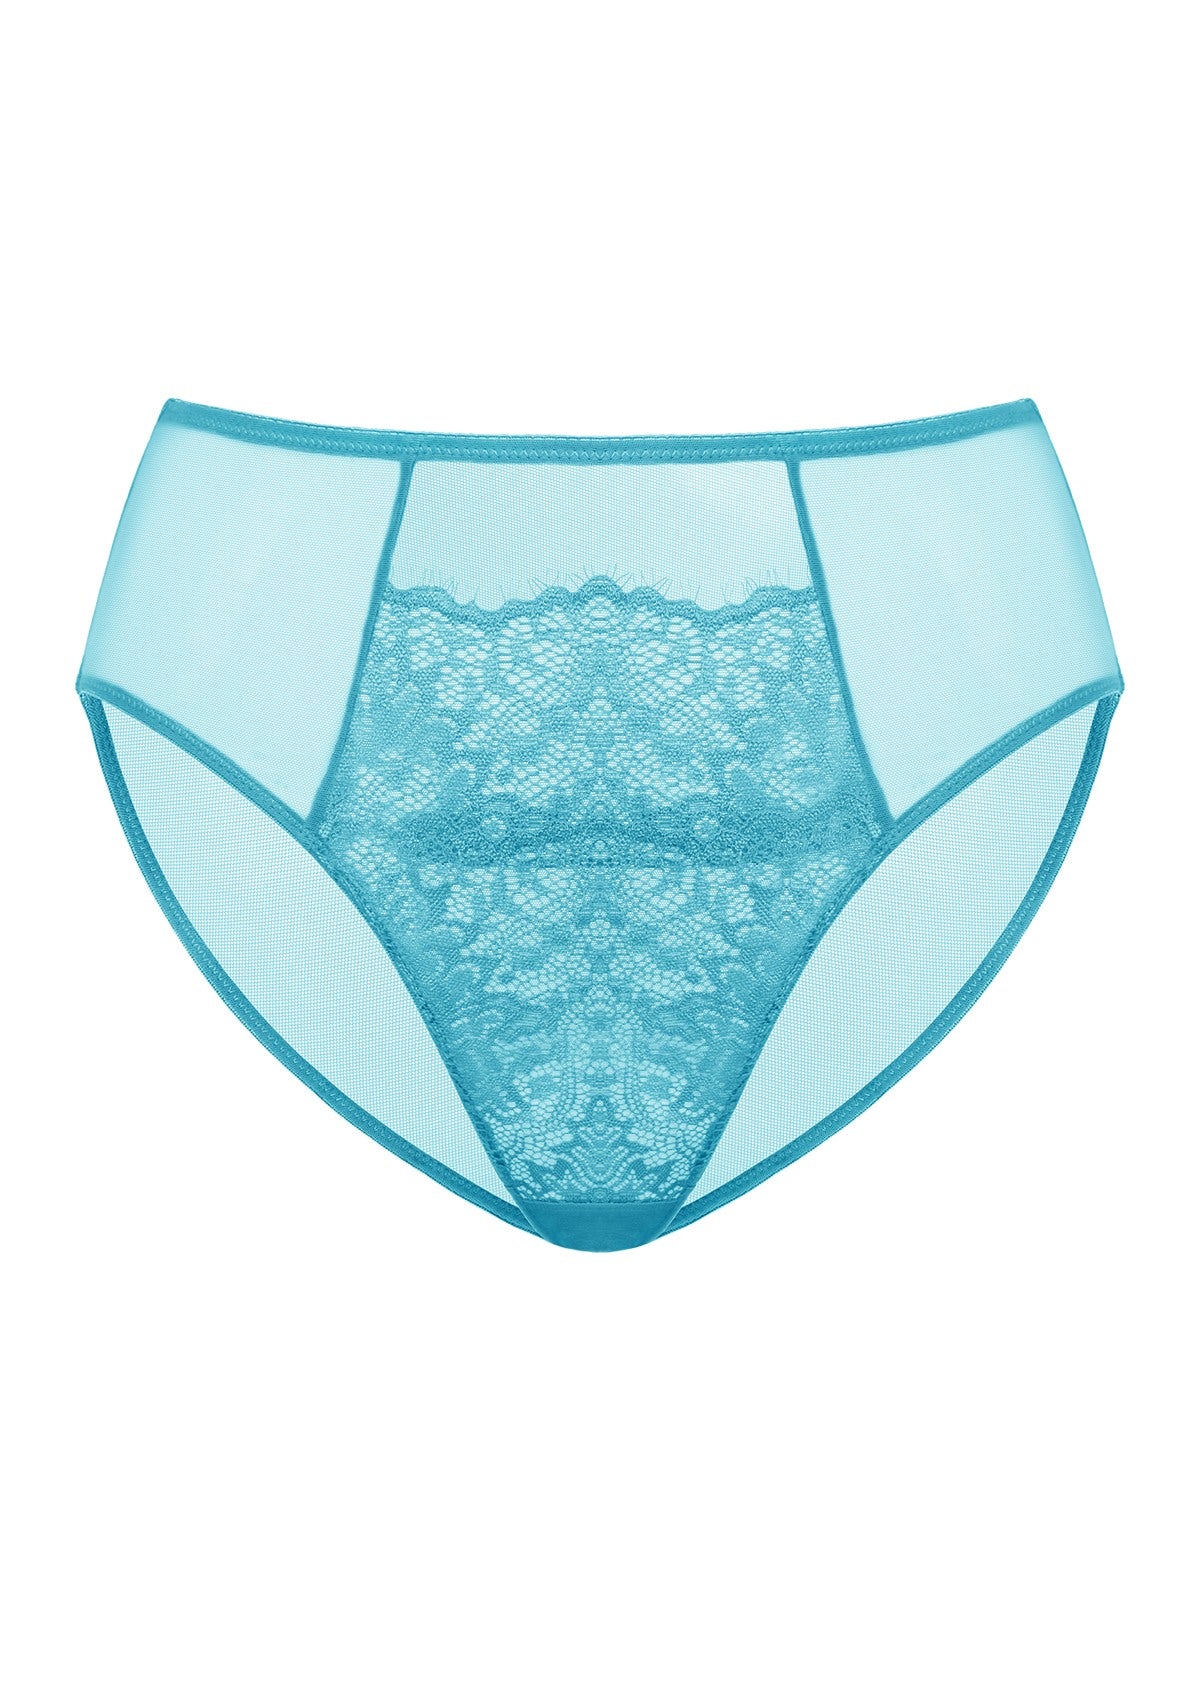 HSIA Spring Romance High-Rise Floral Lacy Panty-Comfort In Style - M / Horizon Blue